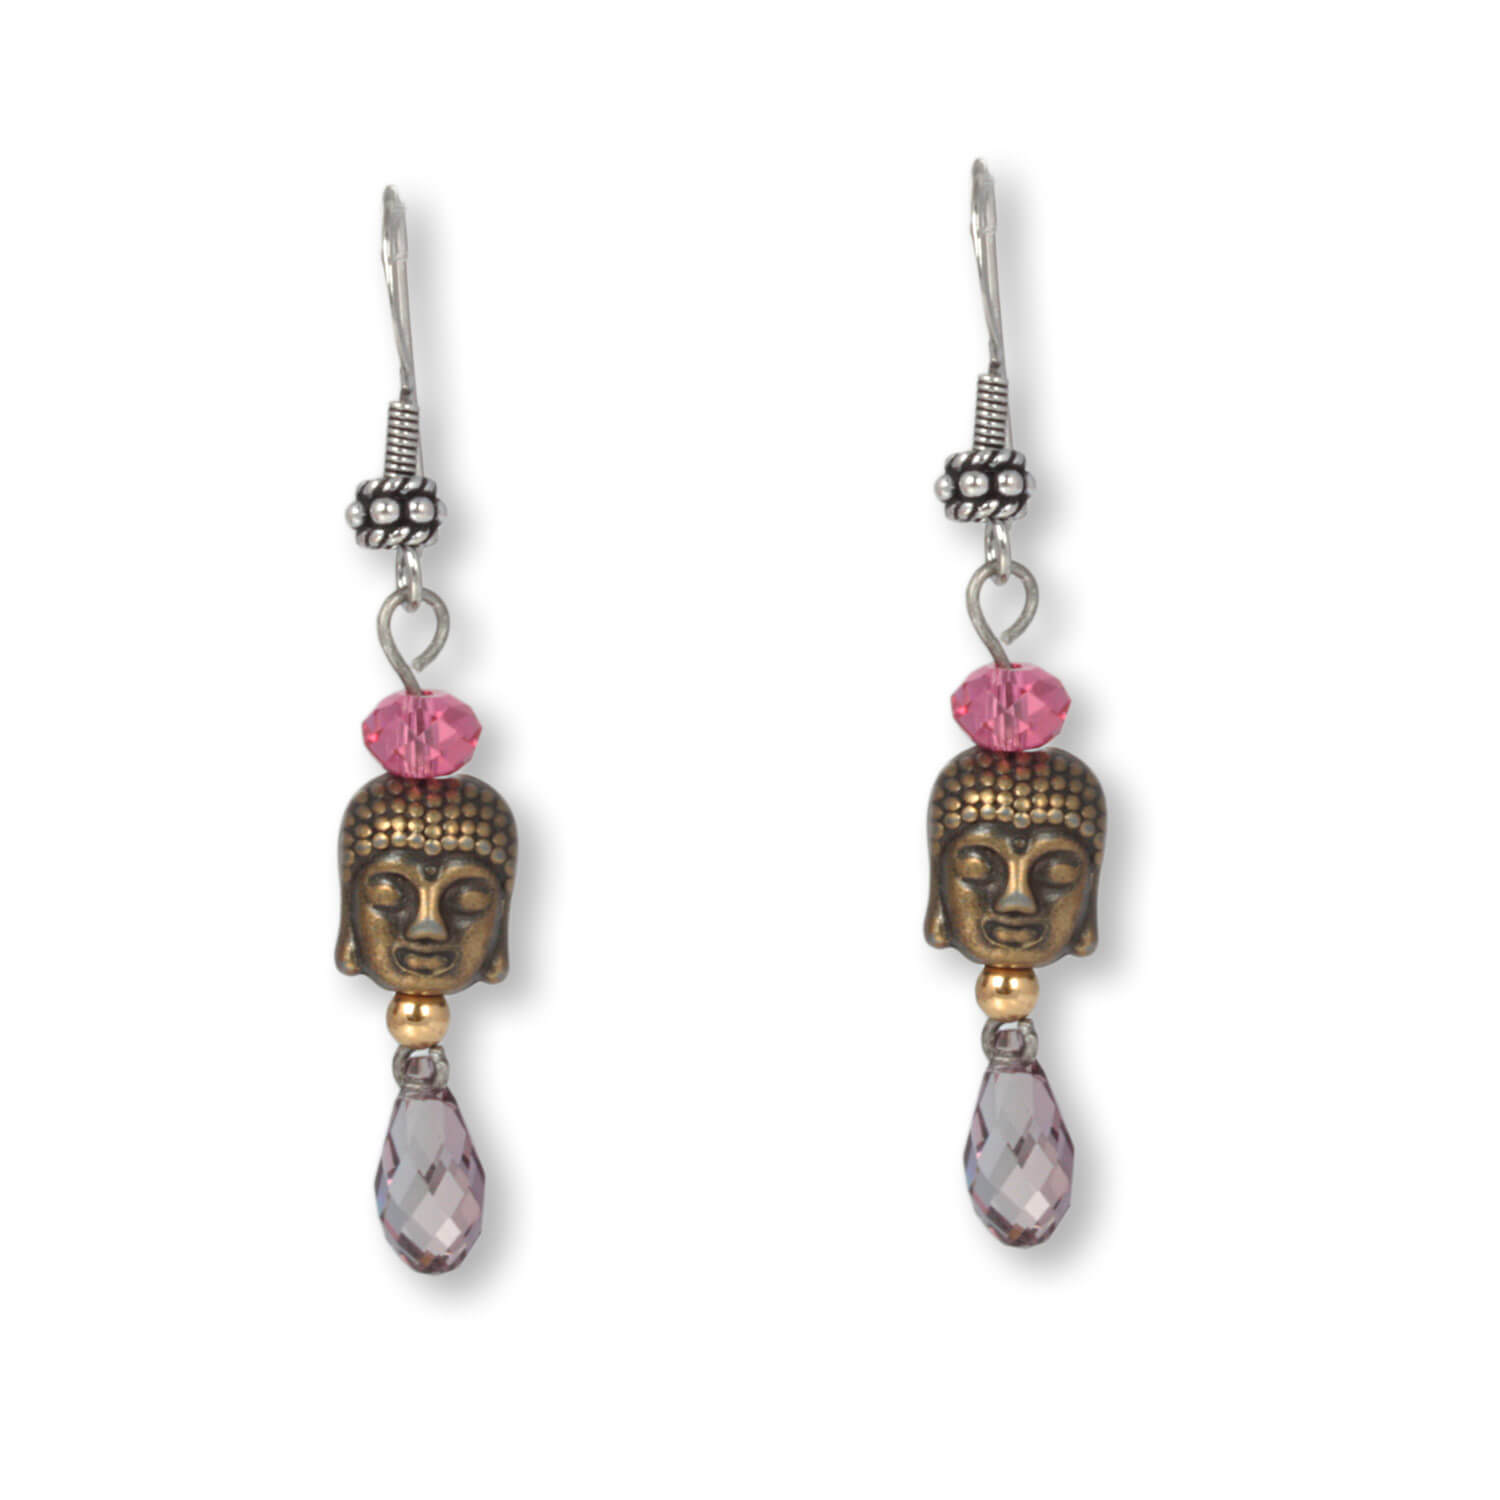 Raspberry Bronze - Buddha earrings with sparkling crystals